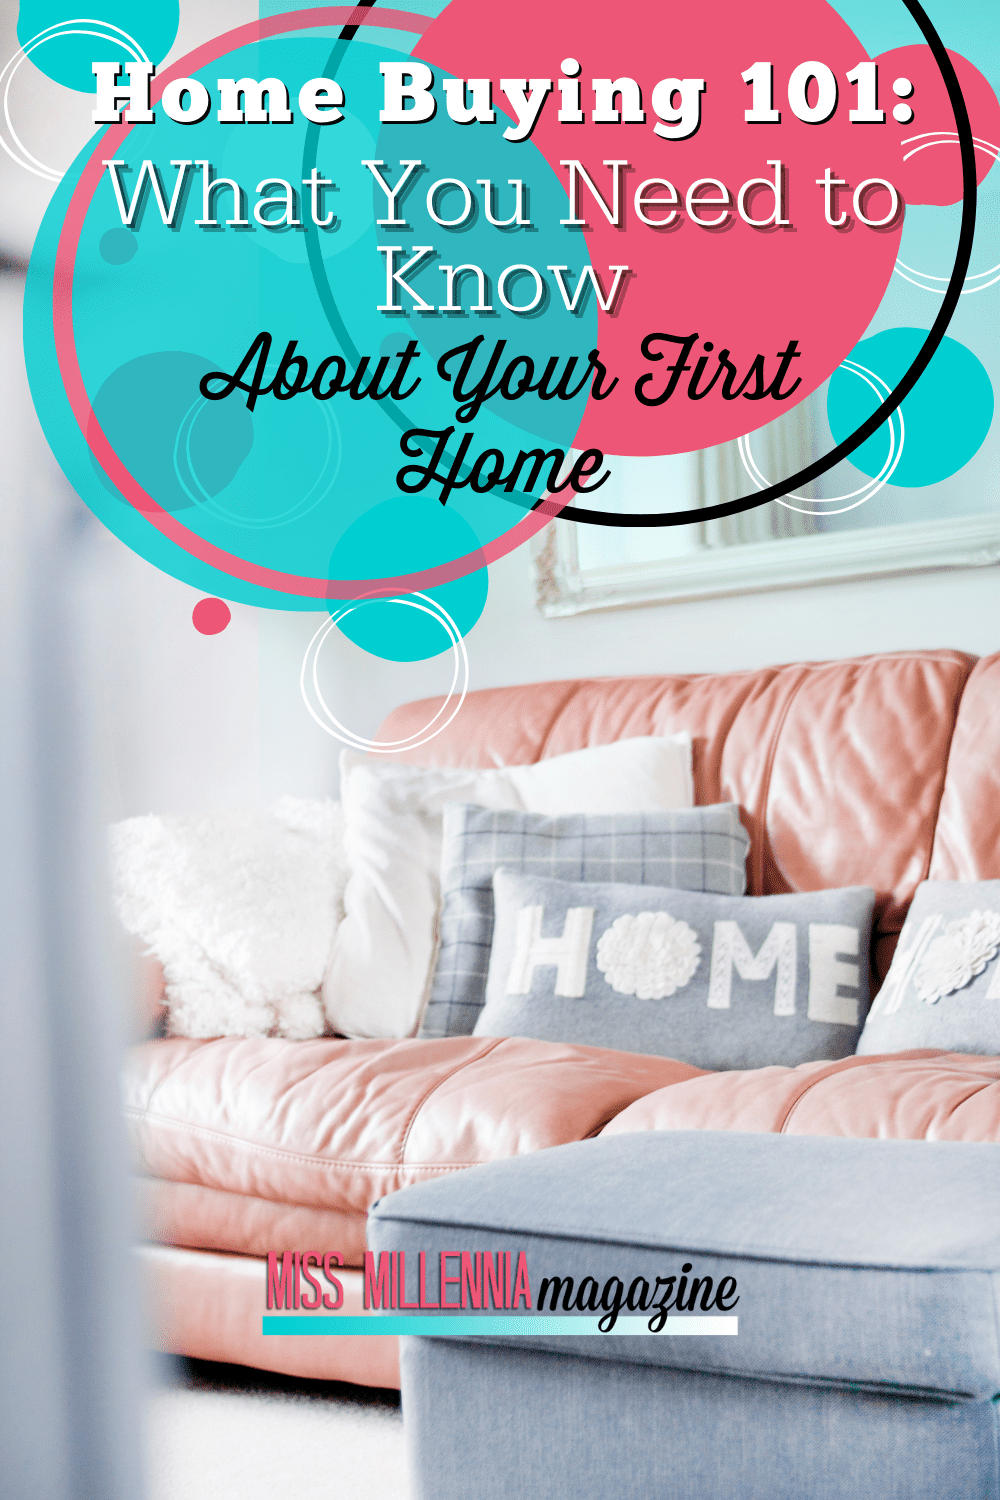 Home Buying 101: What You Need to Know About Your First Home